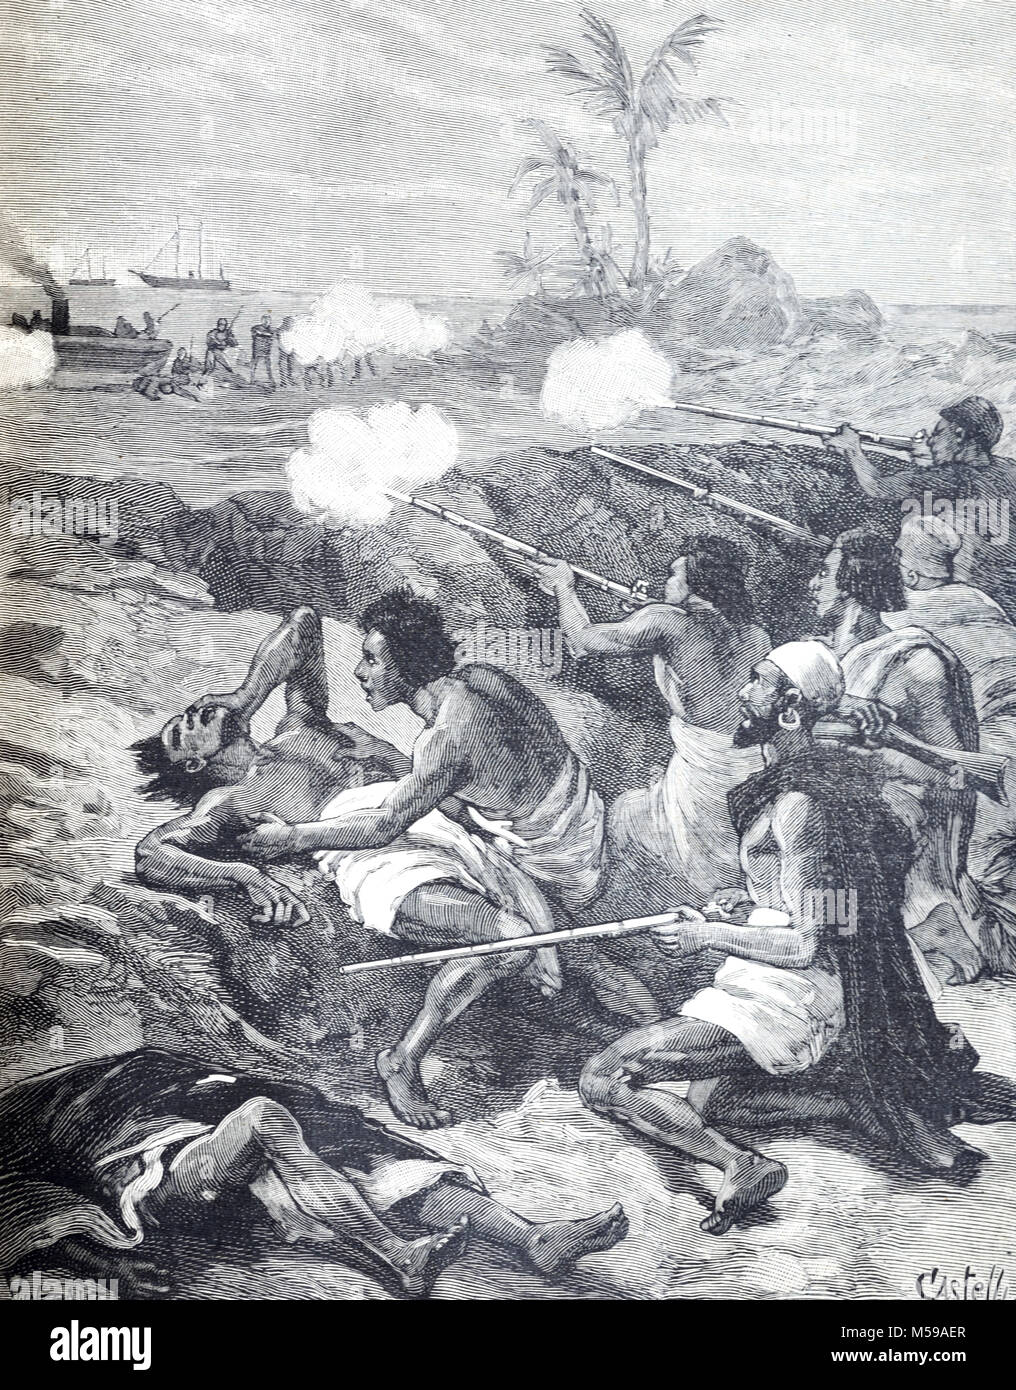 Germans Attack Dar-es-Salaam in the late 1880s When the German Military Suppressed an Uprising Against the Activities of the German East African Company. The Company Established a Trading Post in Dar es Salaam, Tanzania, in 1887 (Engraving, 1889) Stock Photo